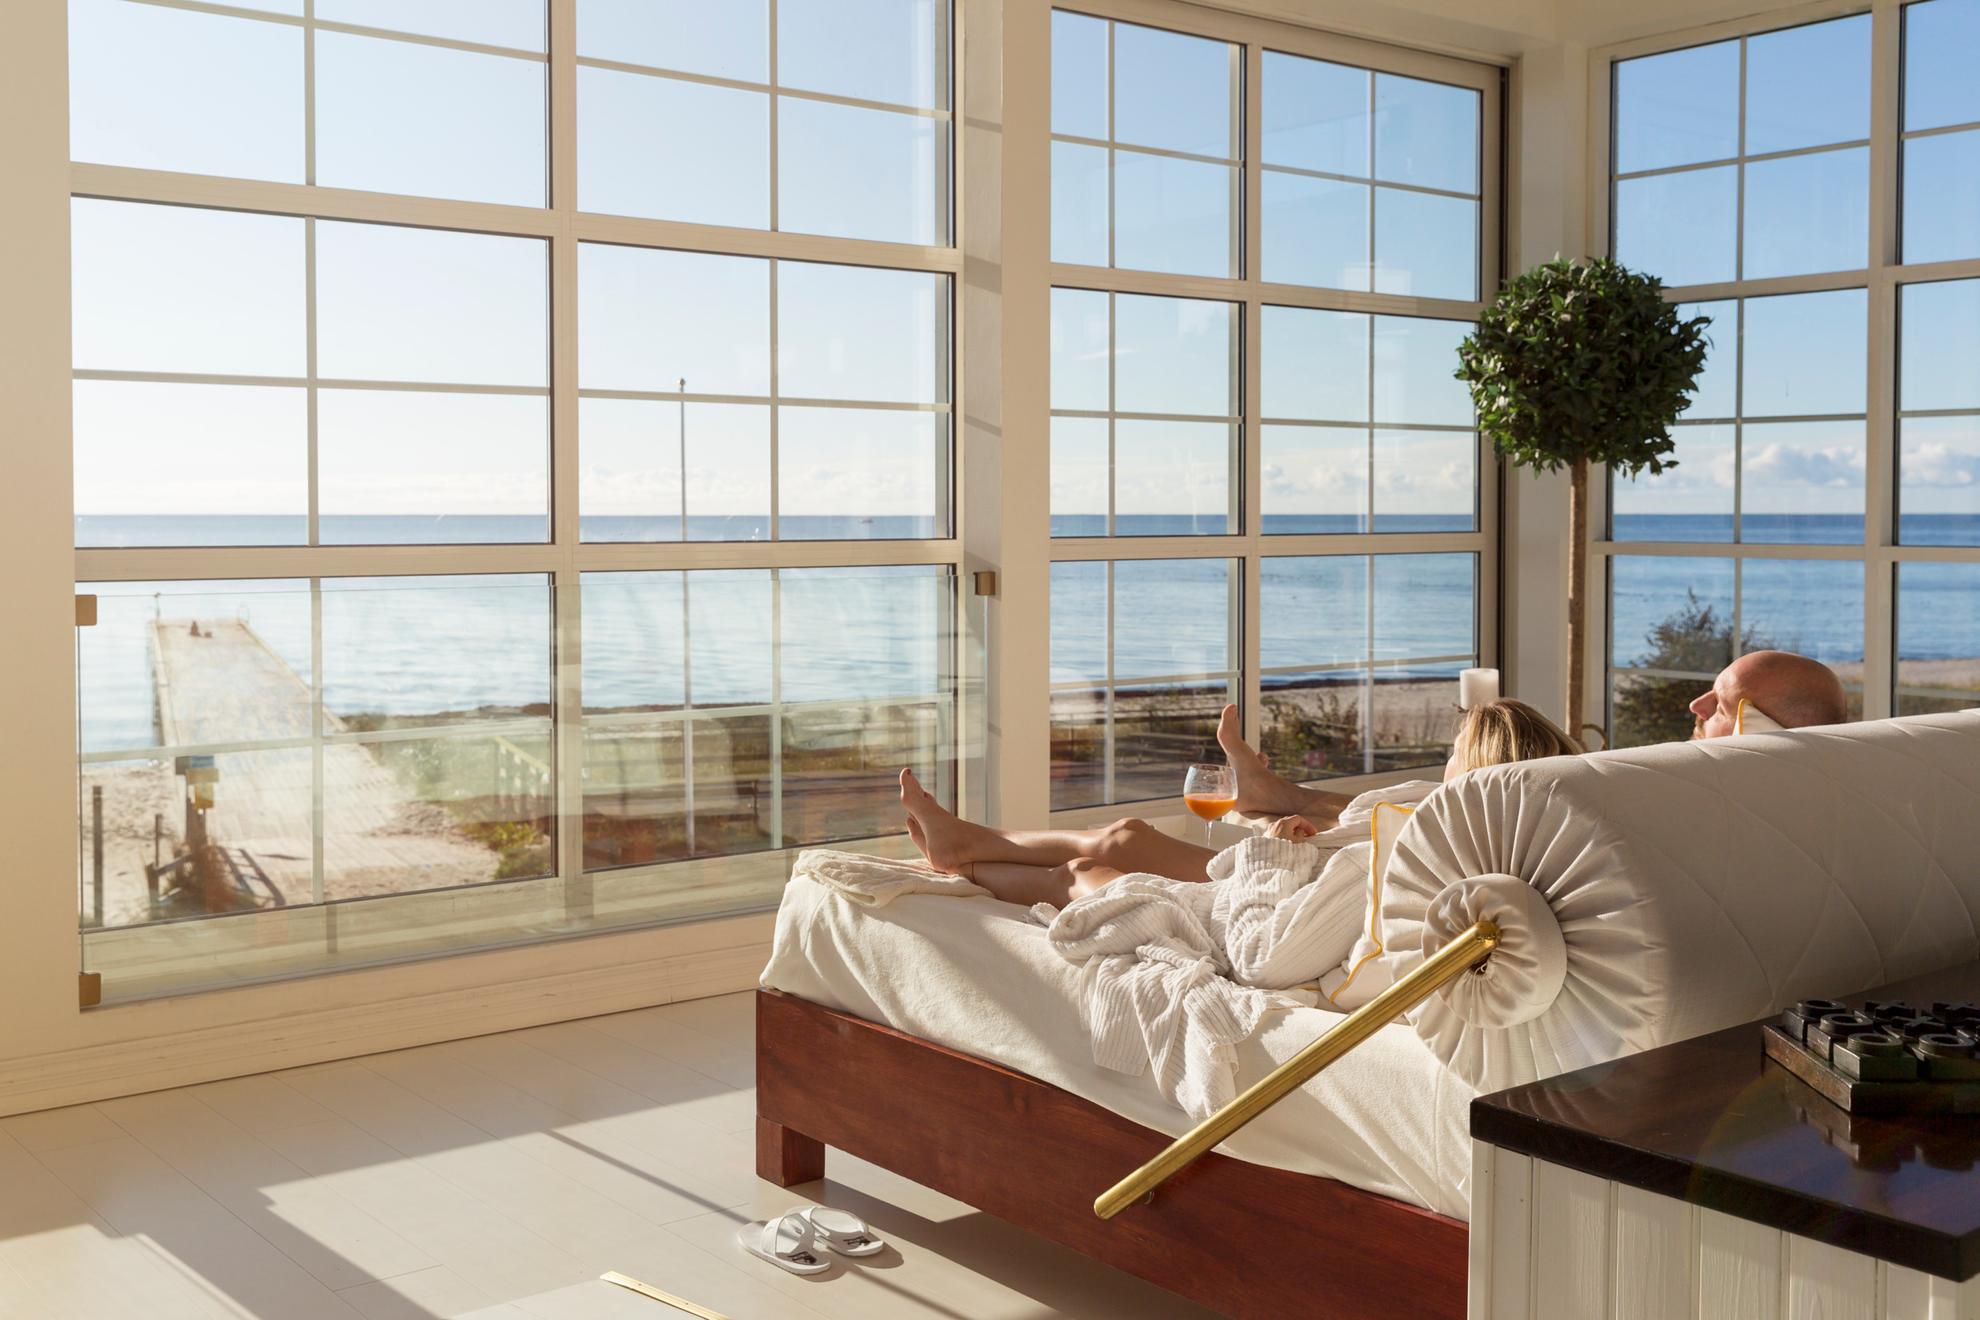 A couple are lying in a large bed next to large windows facing a beach and the sea.